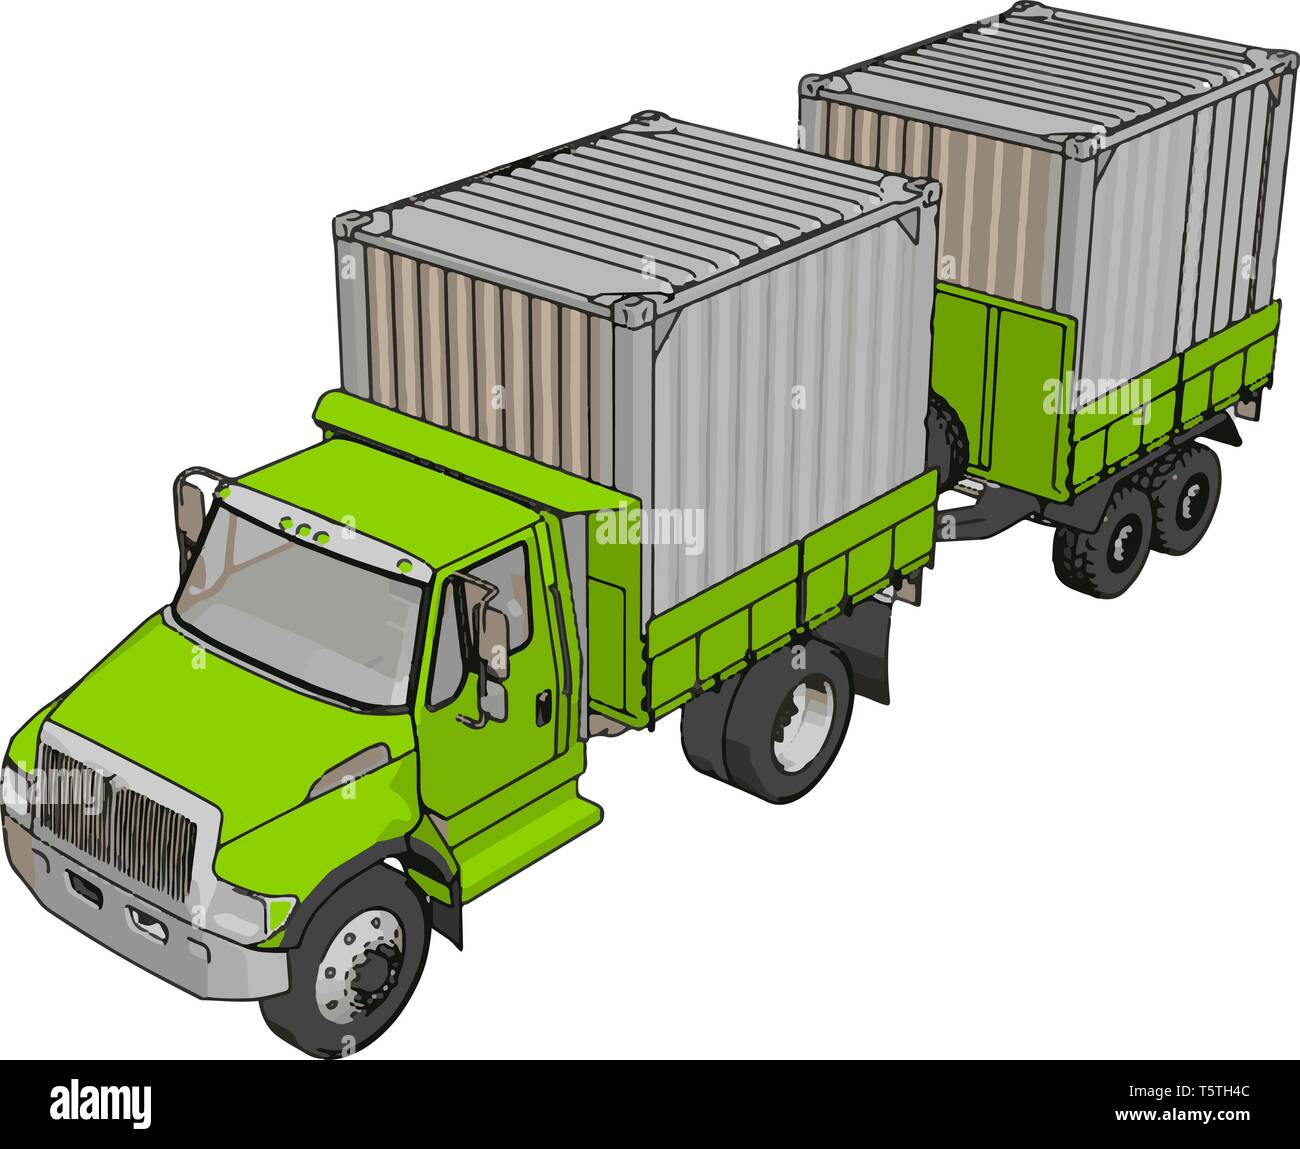 Green container truck with trailer vector illustration on white background Stock Vector